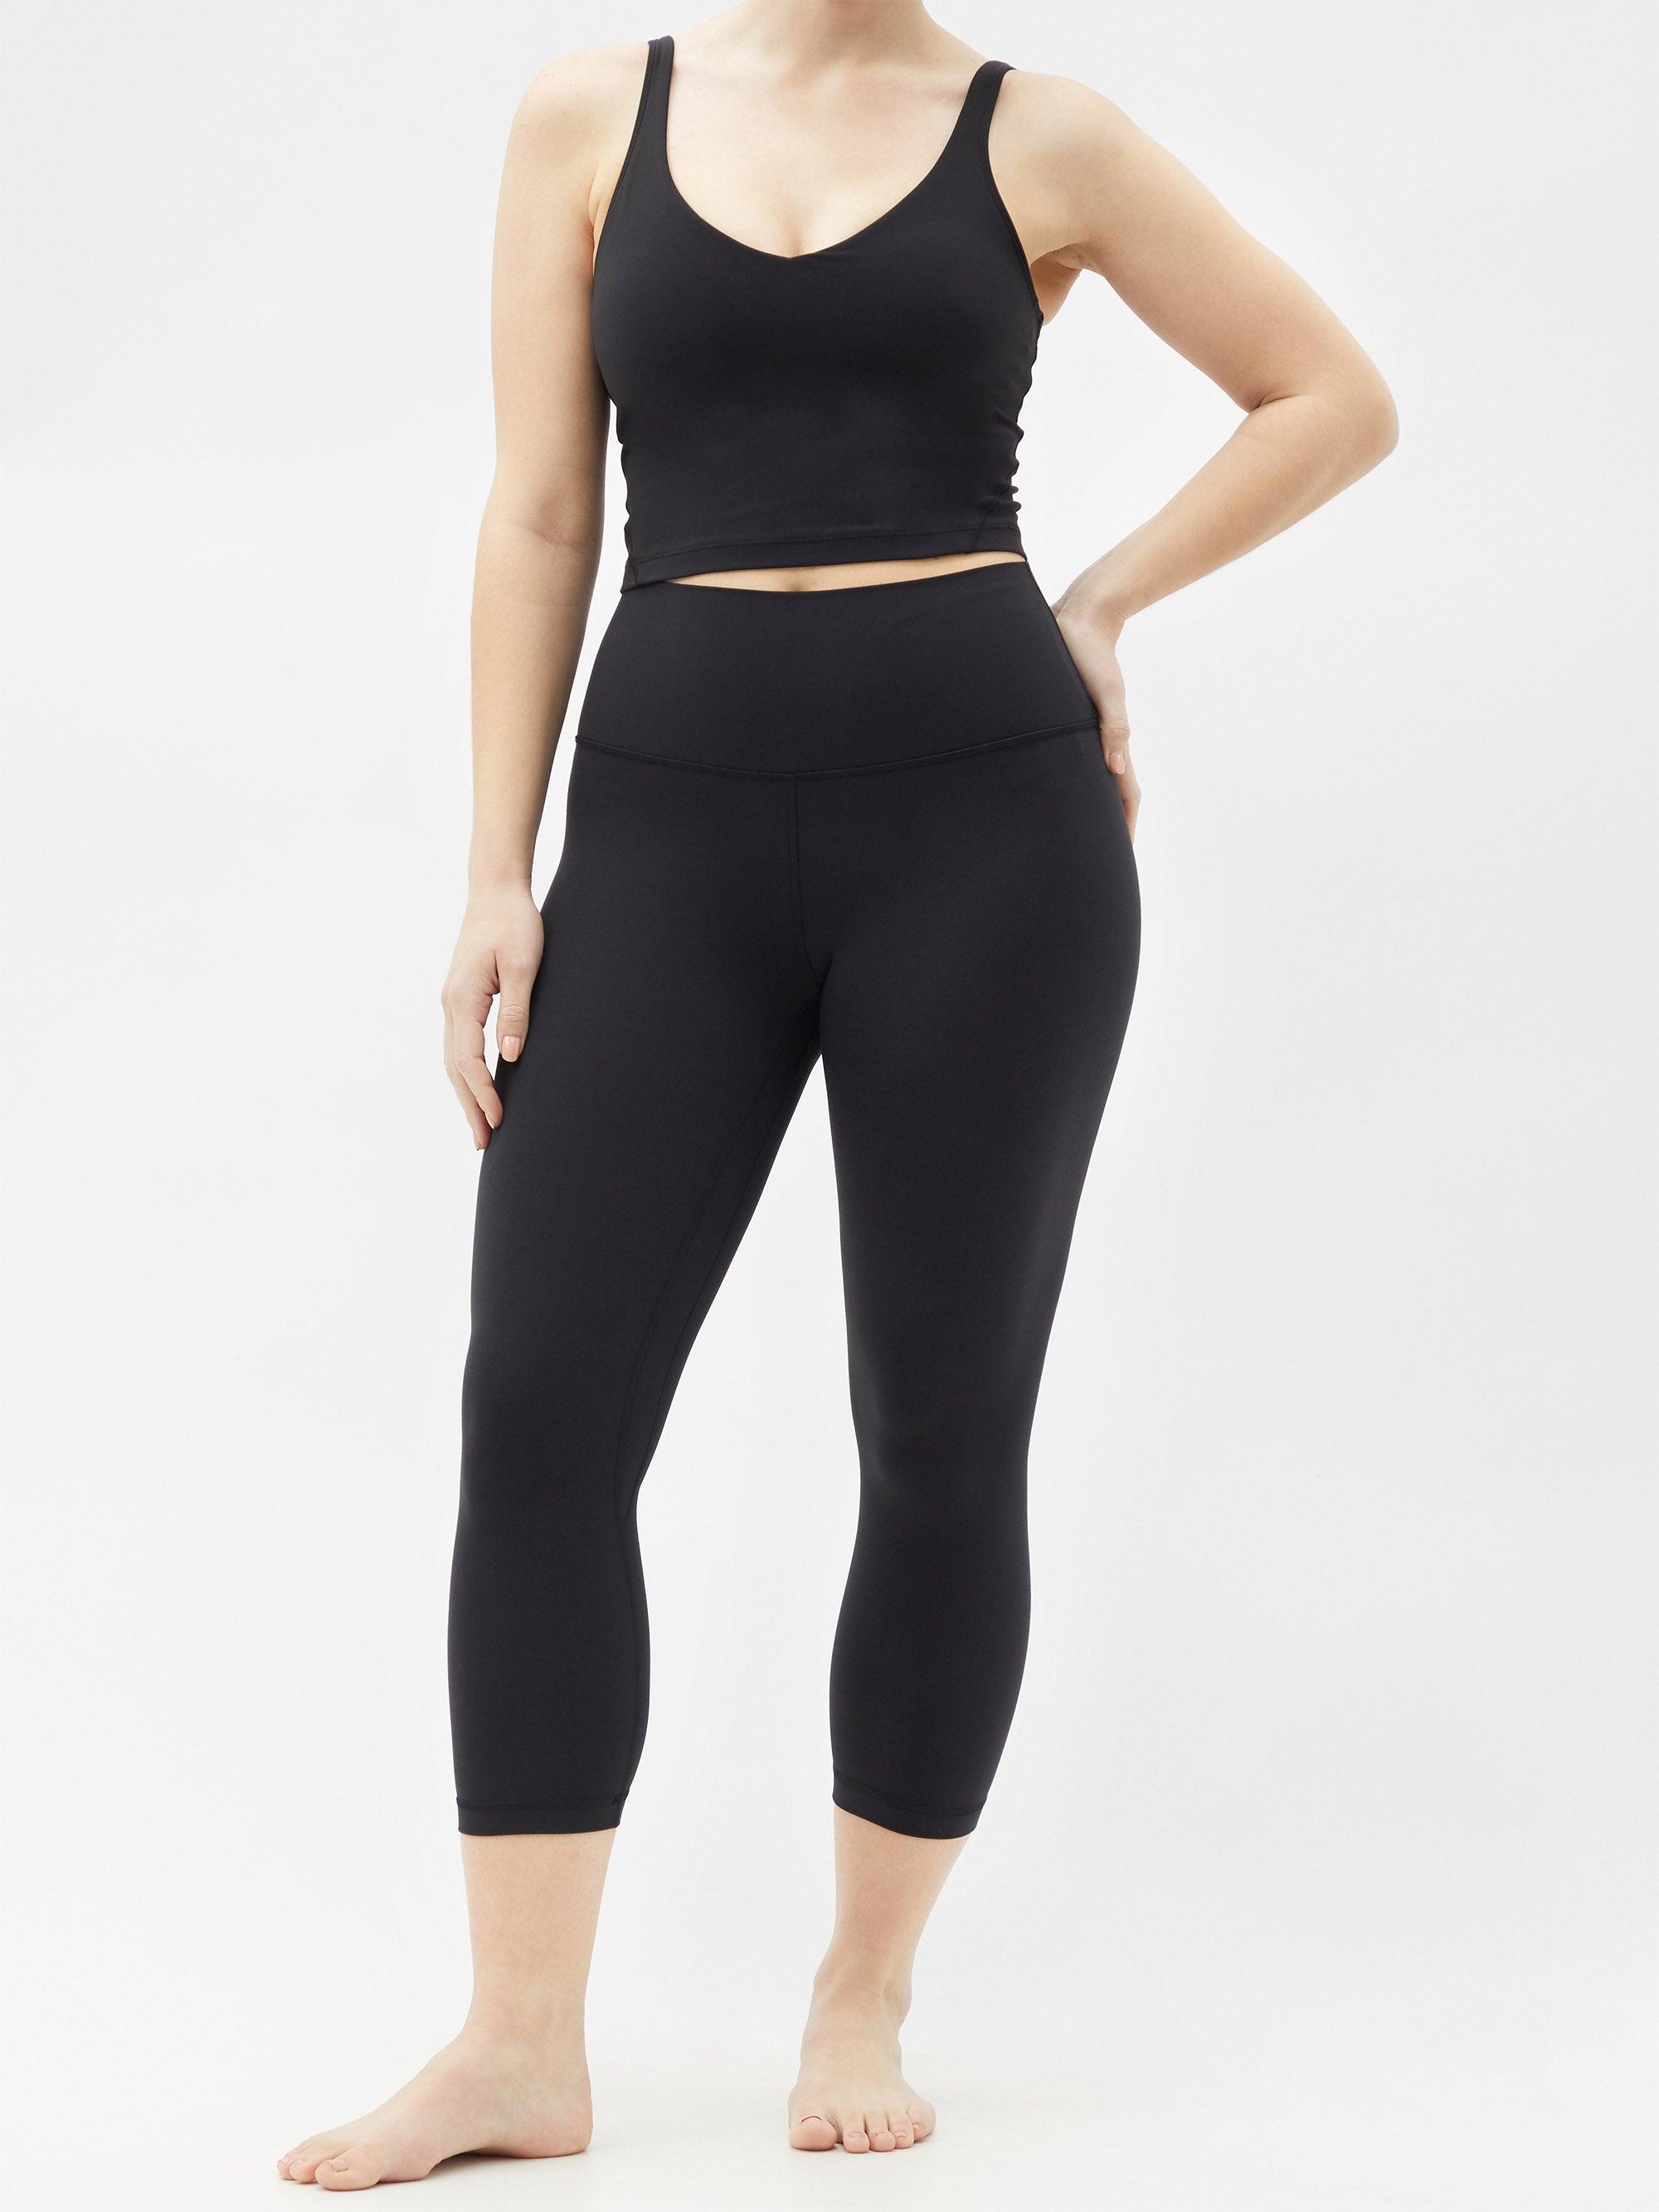 Lululemon Align Stretchy Full Length Yoga Pants - Women's Workout Leggings,  High-Waisted Design, Breathable, Sculpted Fit, 28 Inch Inseam, Incognito